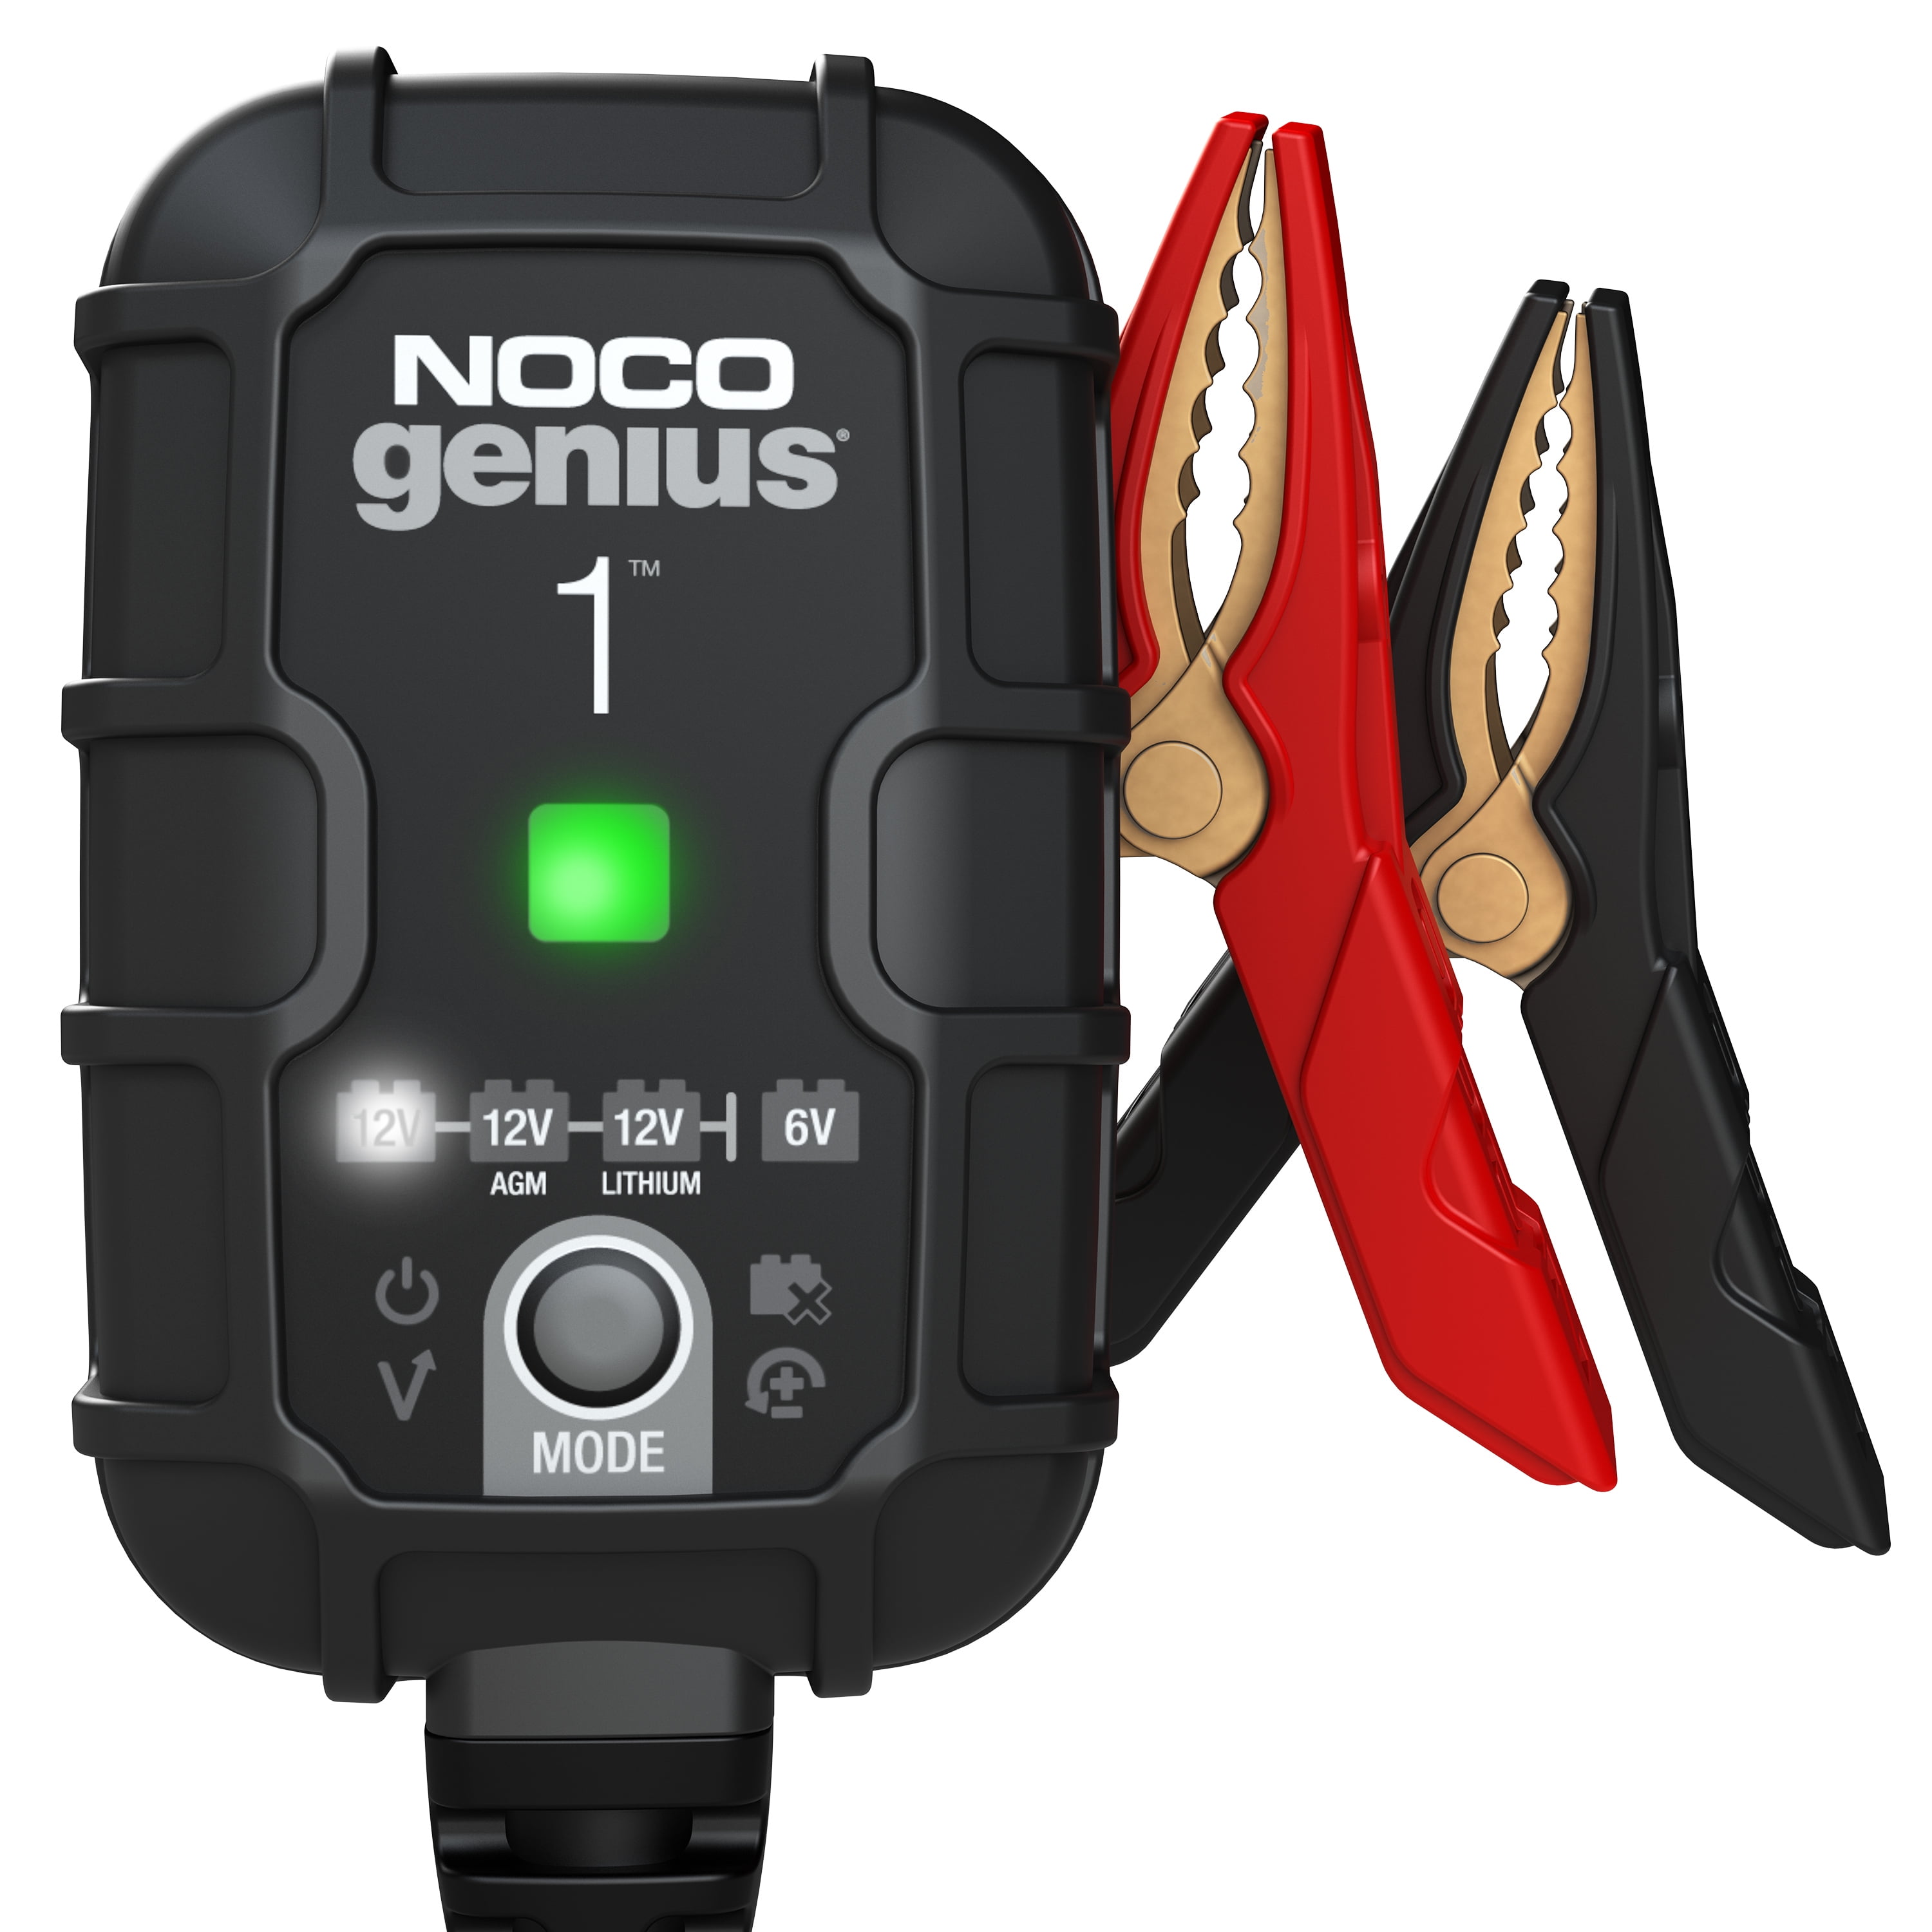 NOCO GENIUS5, 5-Amp Fully-Automatic Smart Charger, 6V and 12V 